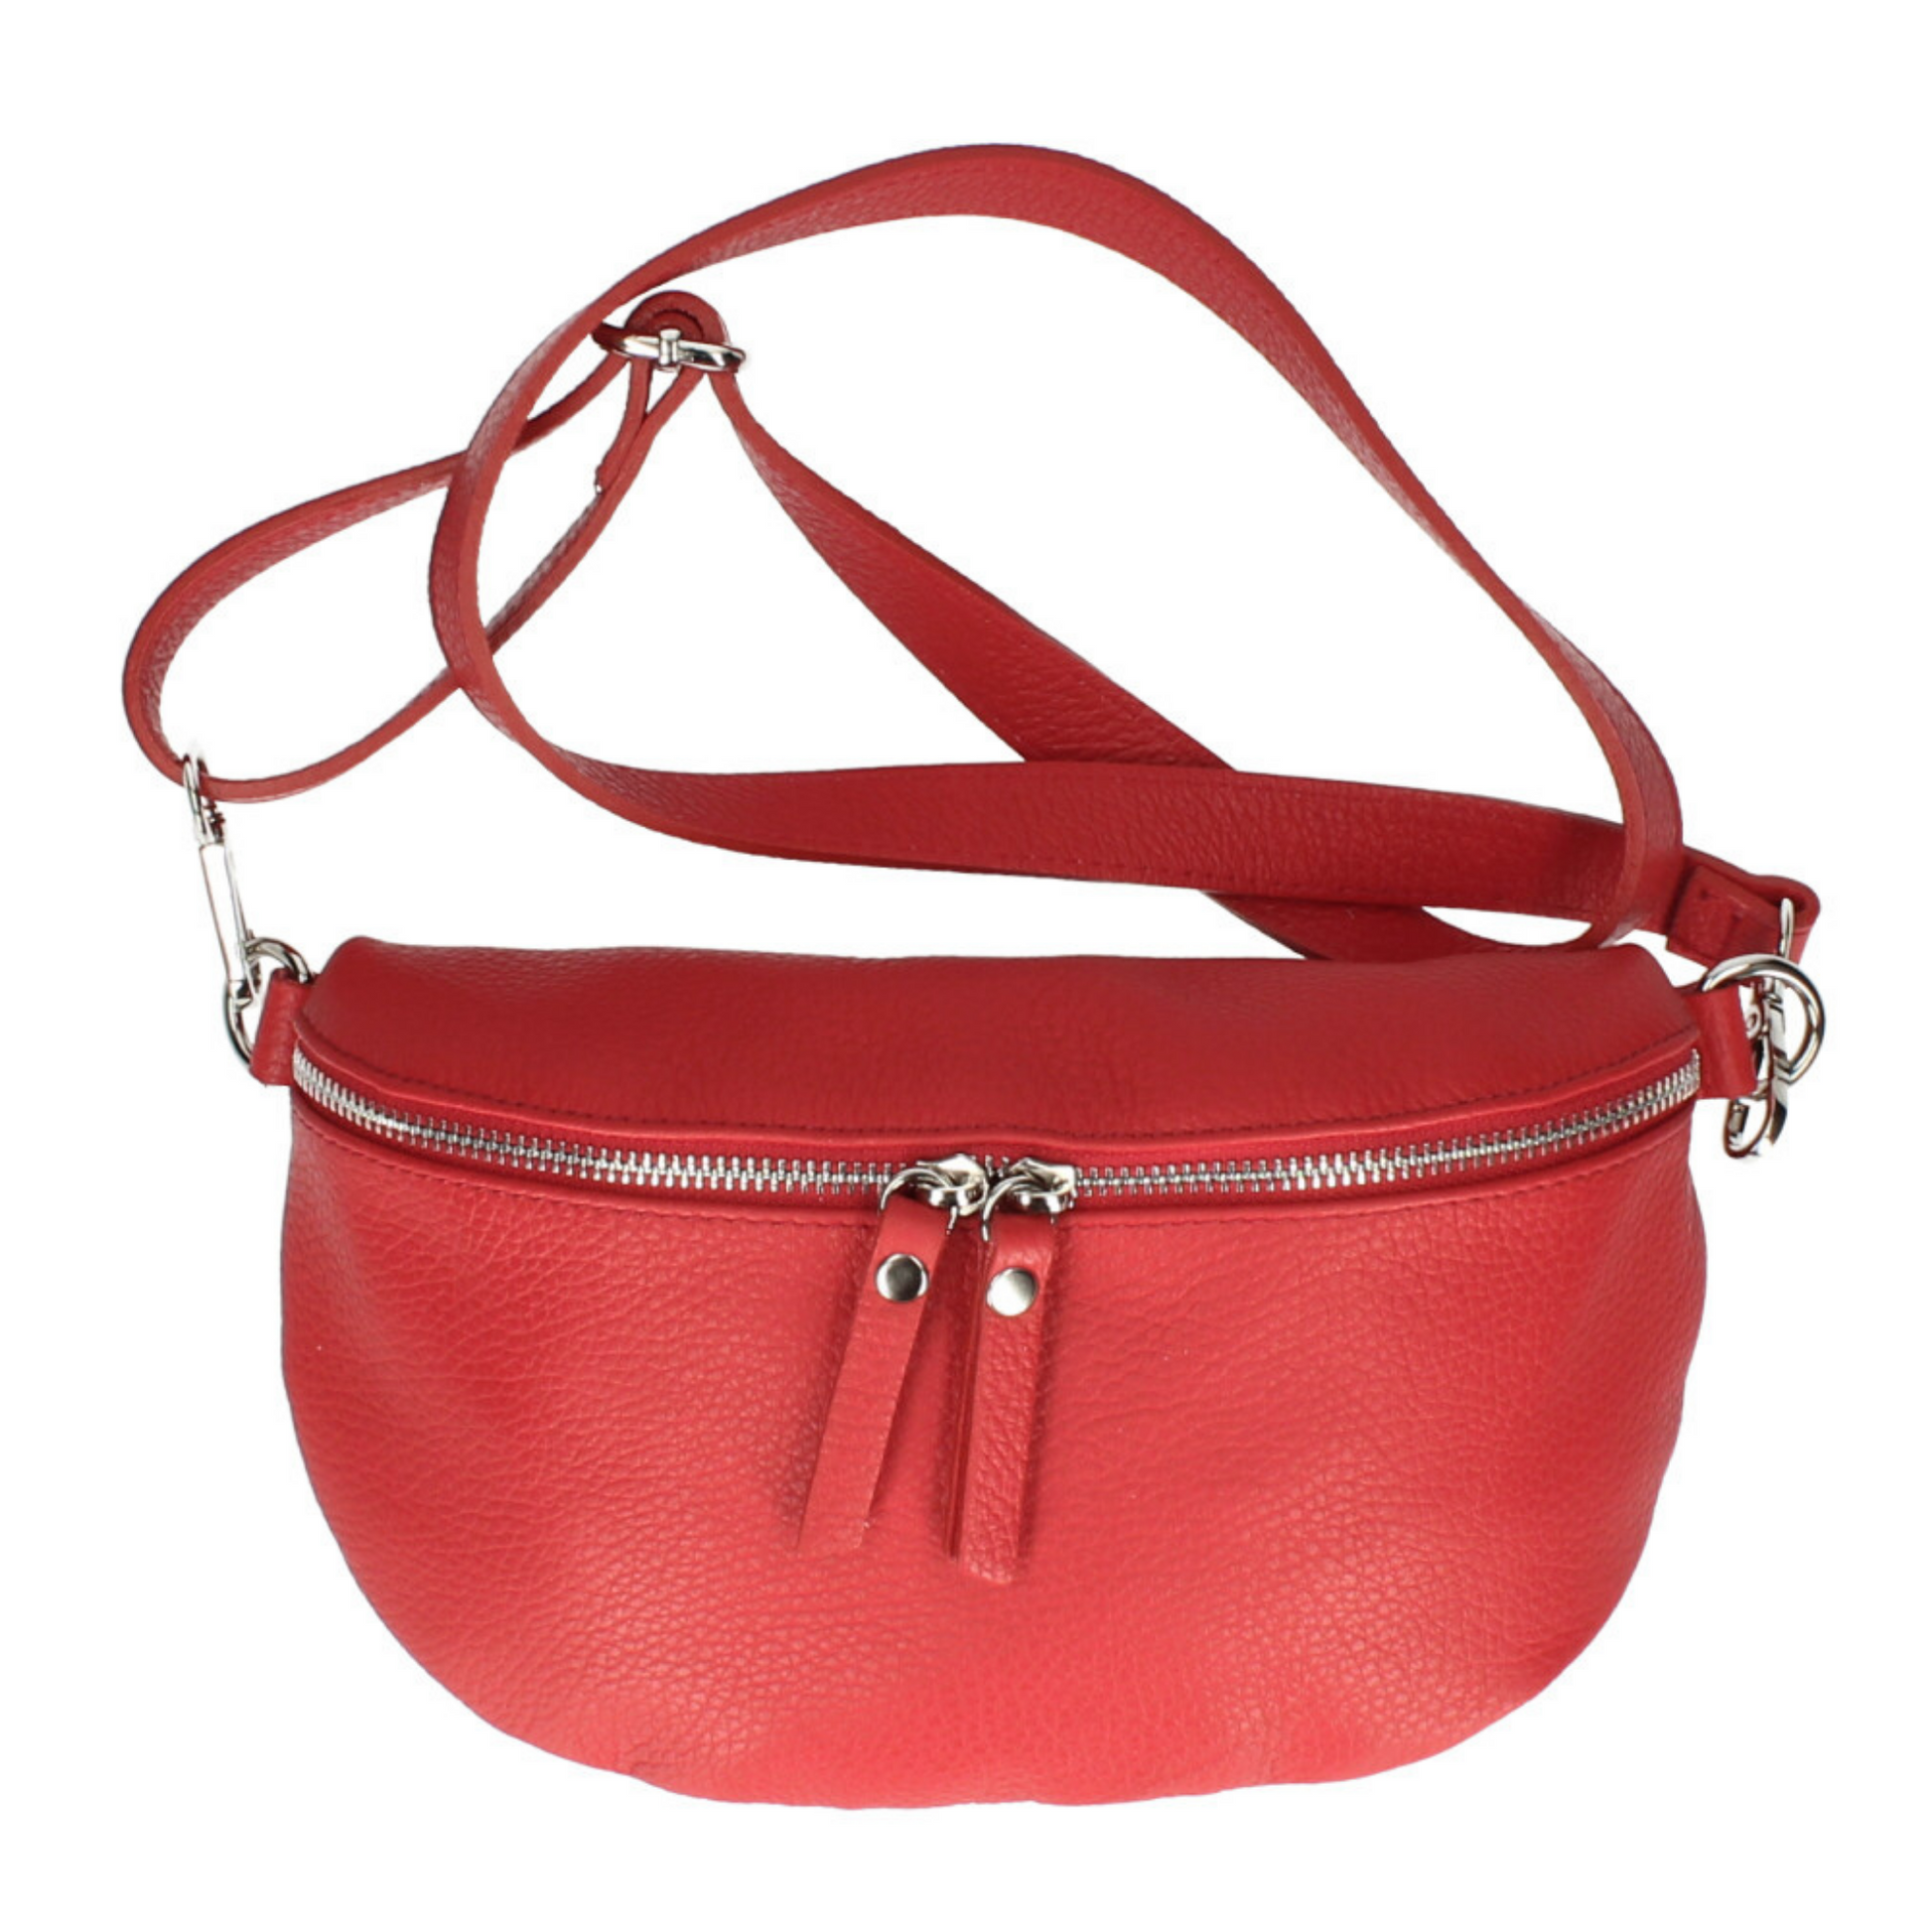 Red leather bumbag